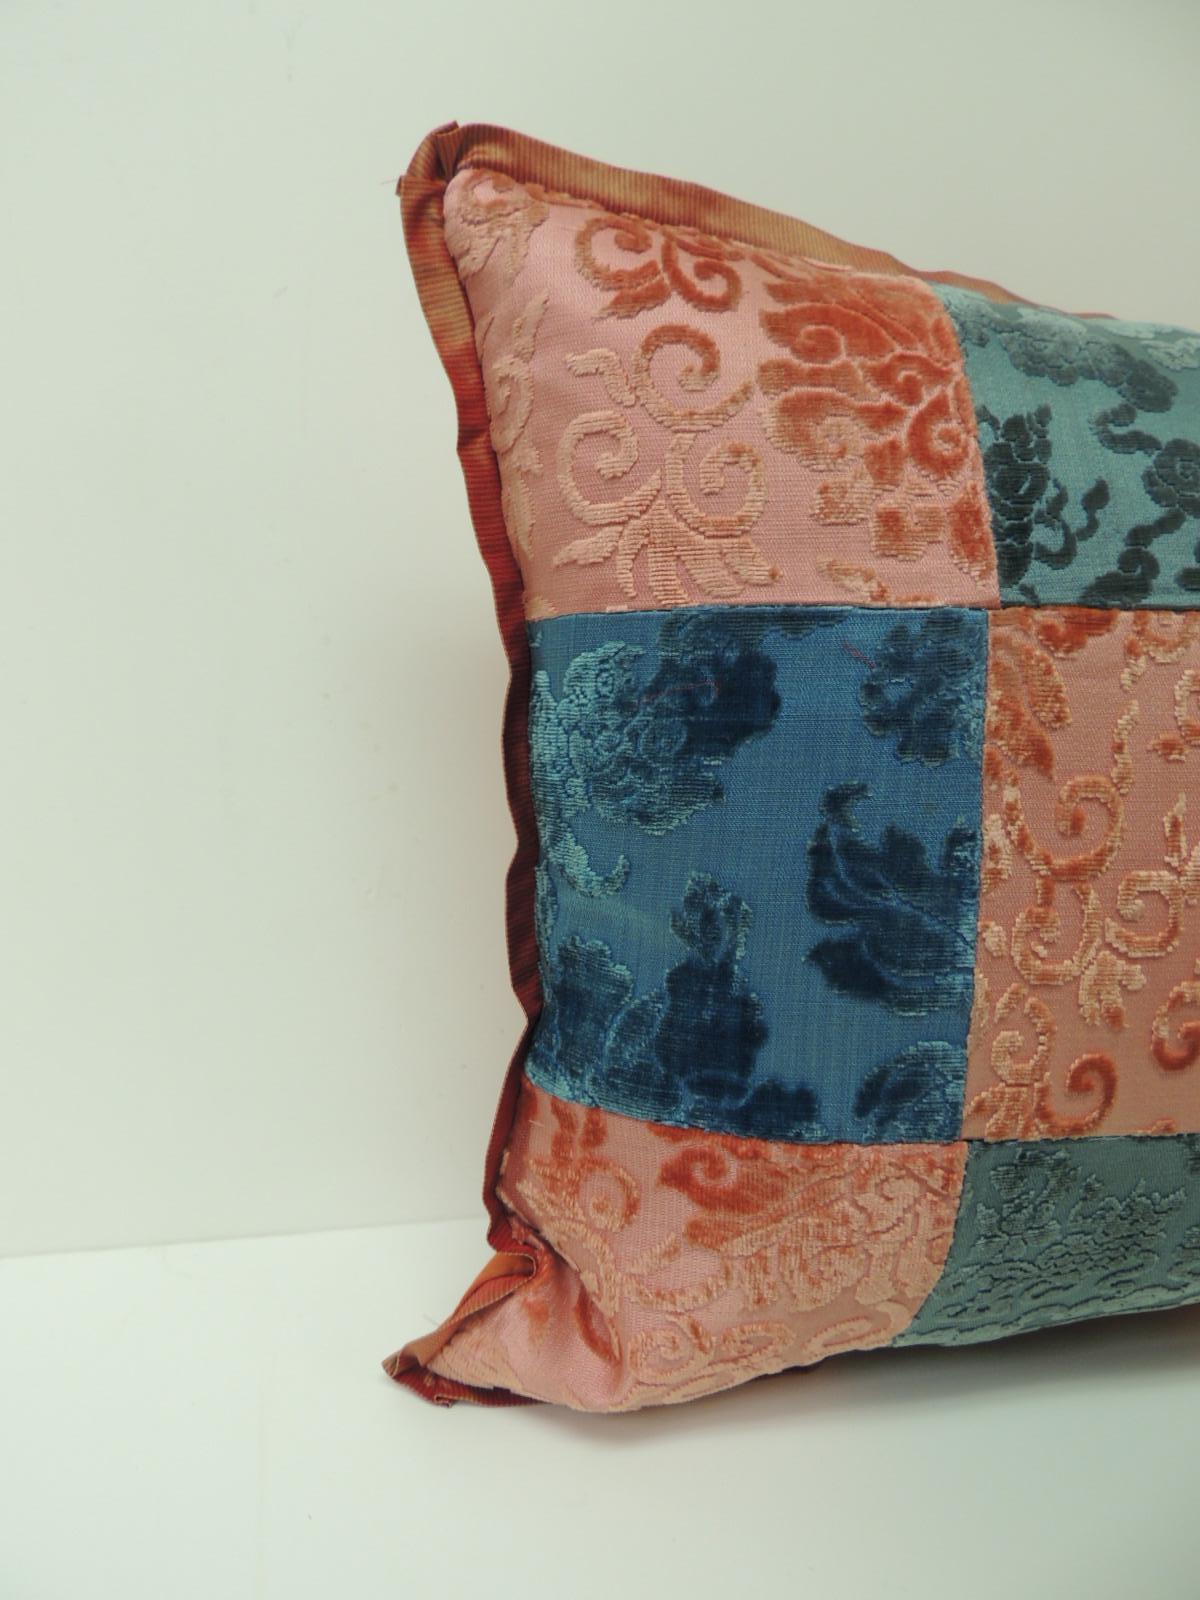 Pink and blue romance through the Gilded Age’s Asian textiles patchwork Lumbar pillow.
Decorative pillow handcrafted from two Asian antique textiles combining floral silk cut velvet gaufrage in pink with chrysanthemums motifs and blue clouds. These